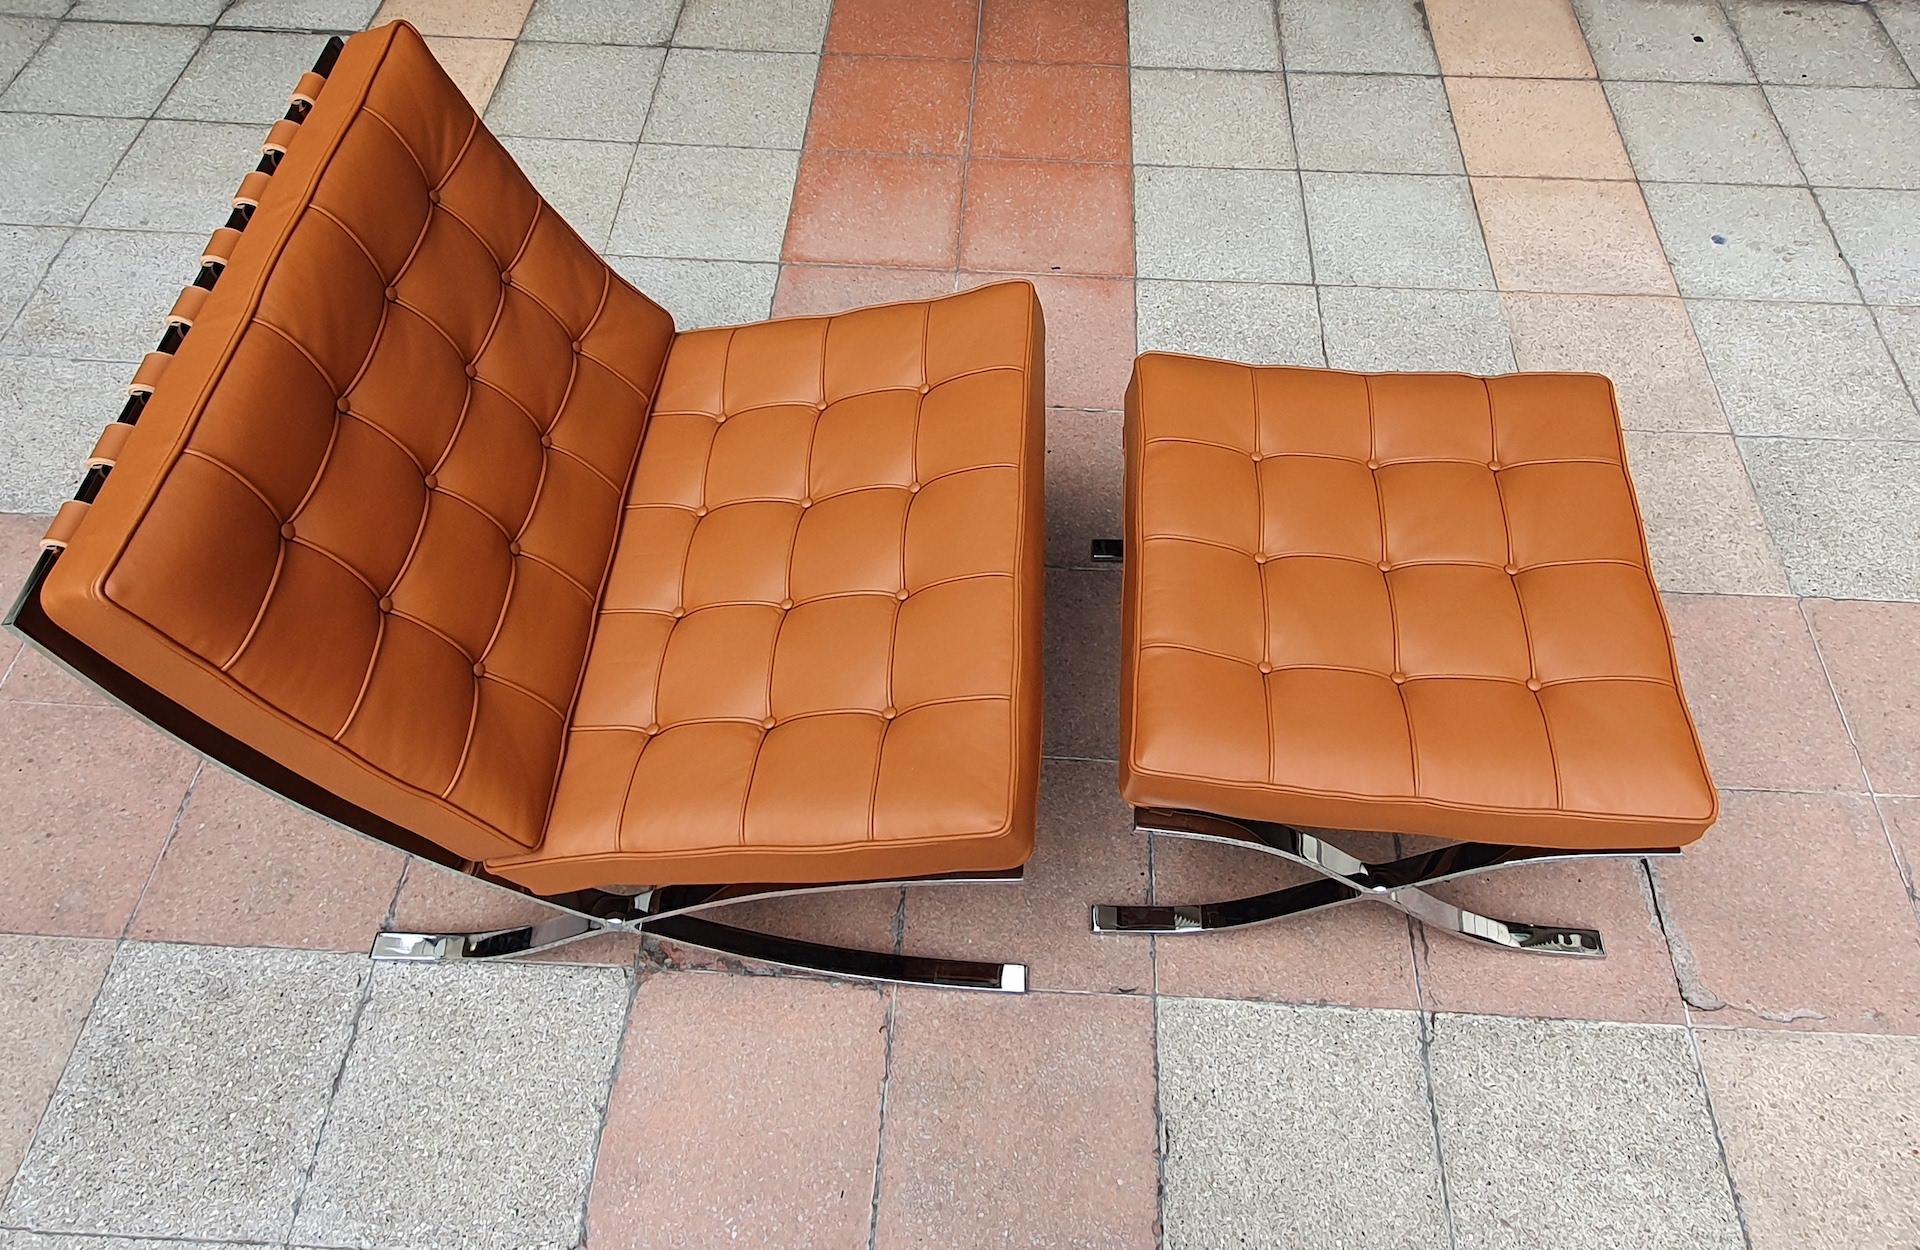 Mies van den Rohe
Barcelona armchair and ottoman
Camel Leather - stainless steel structure - Knoll Edition 2020 signed
Perfect condition
Superb color and condition
7500 euros.
2 sets available.